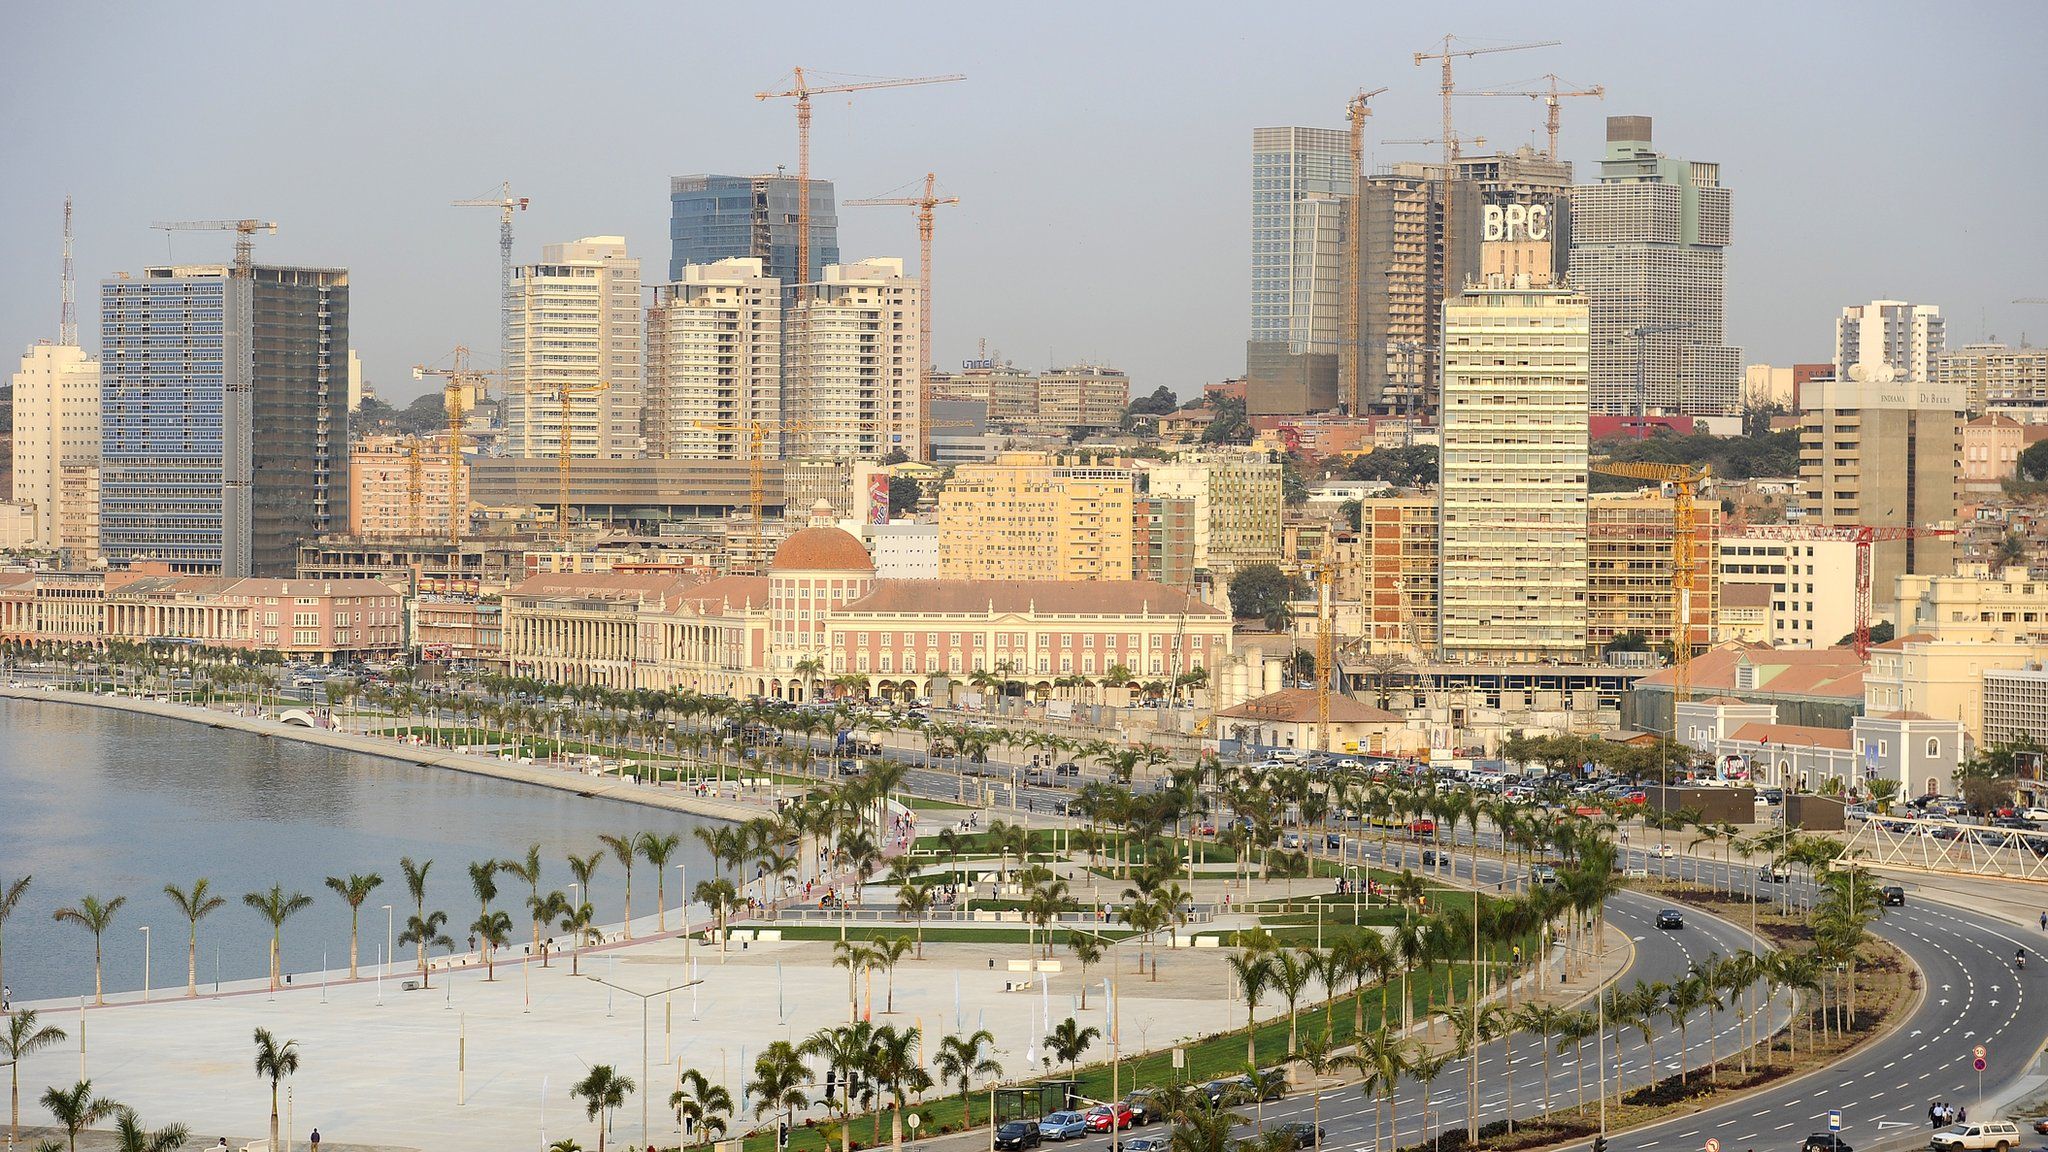 A general view of Luanda Central Business District (CBD) from 2012